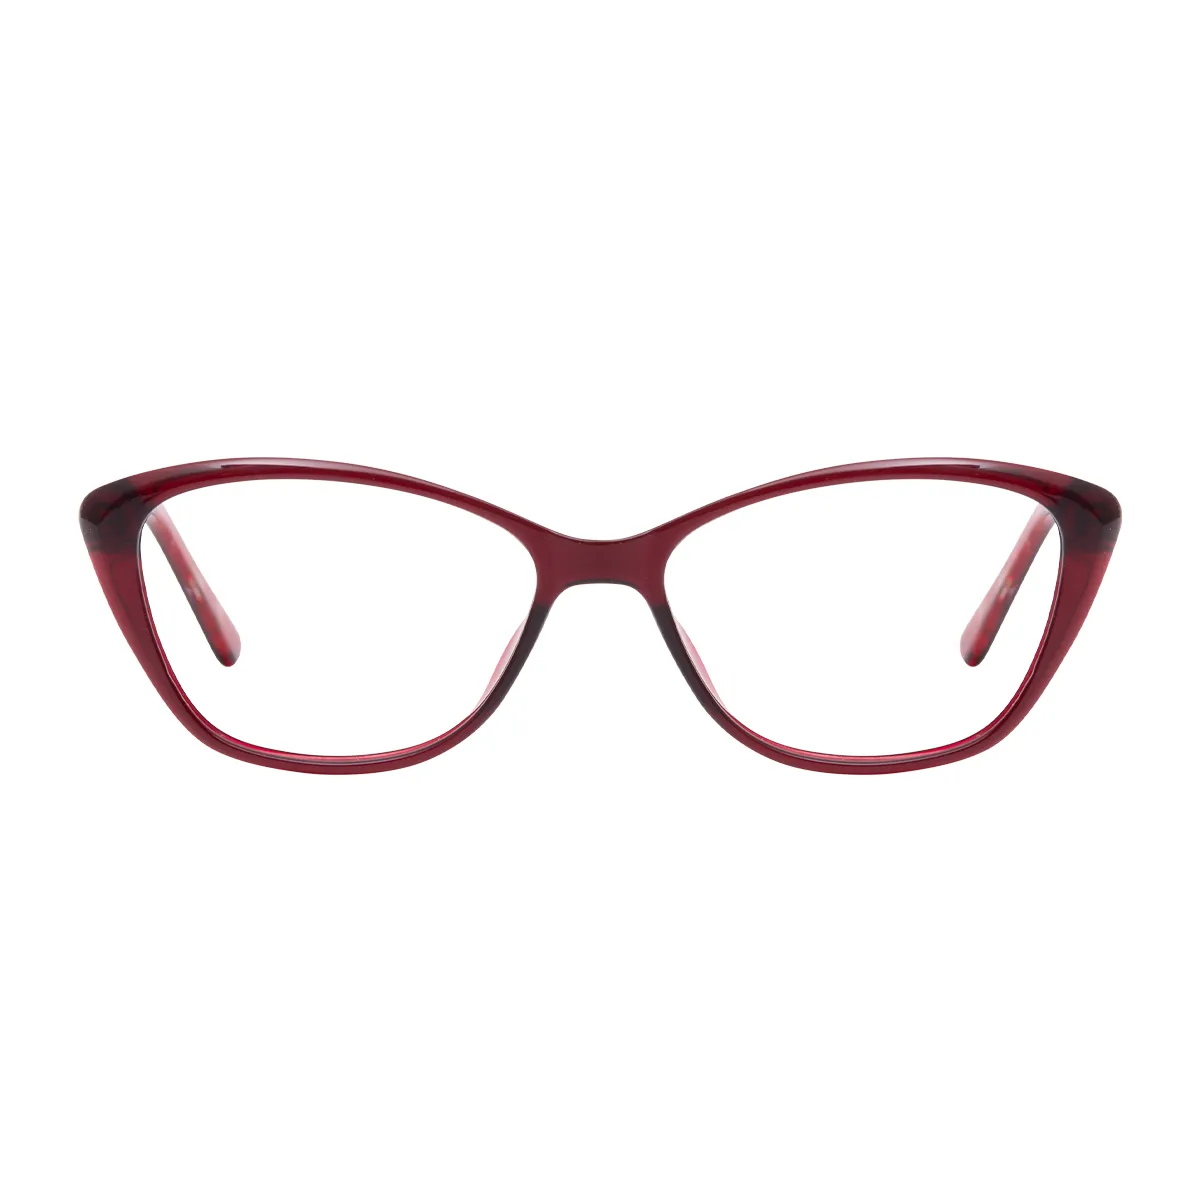 Pedro - Oval Red Glasses for Women